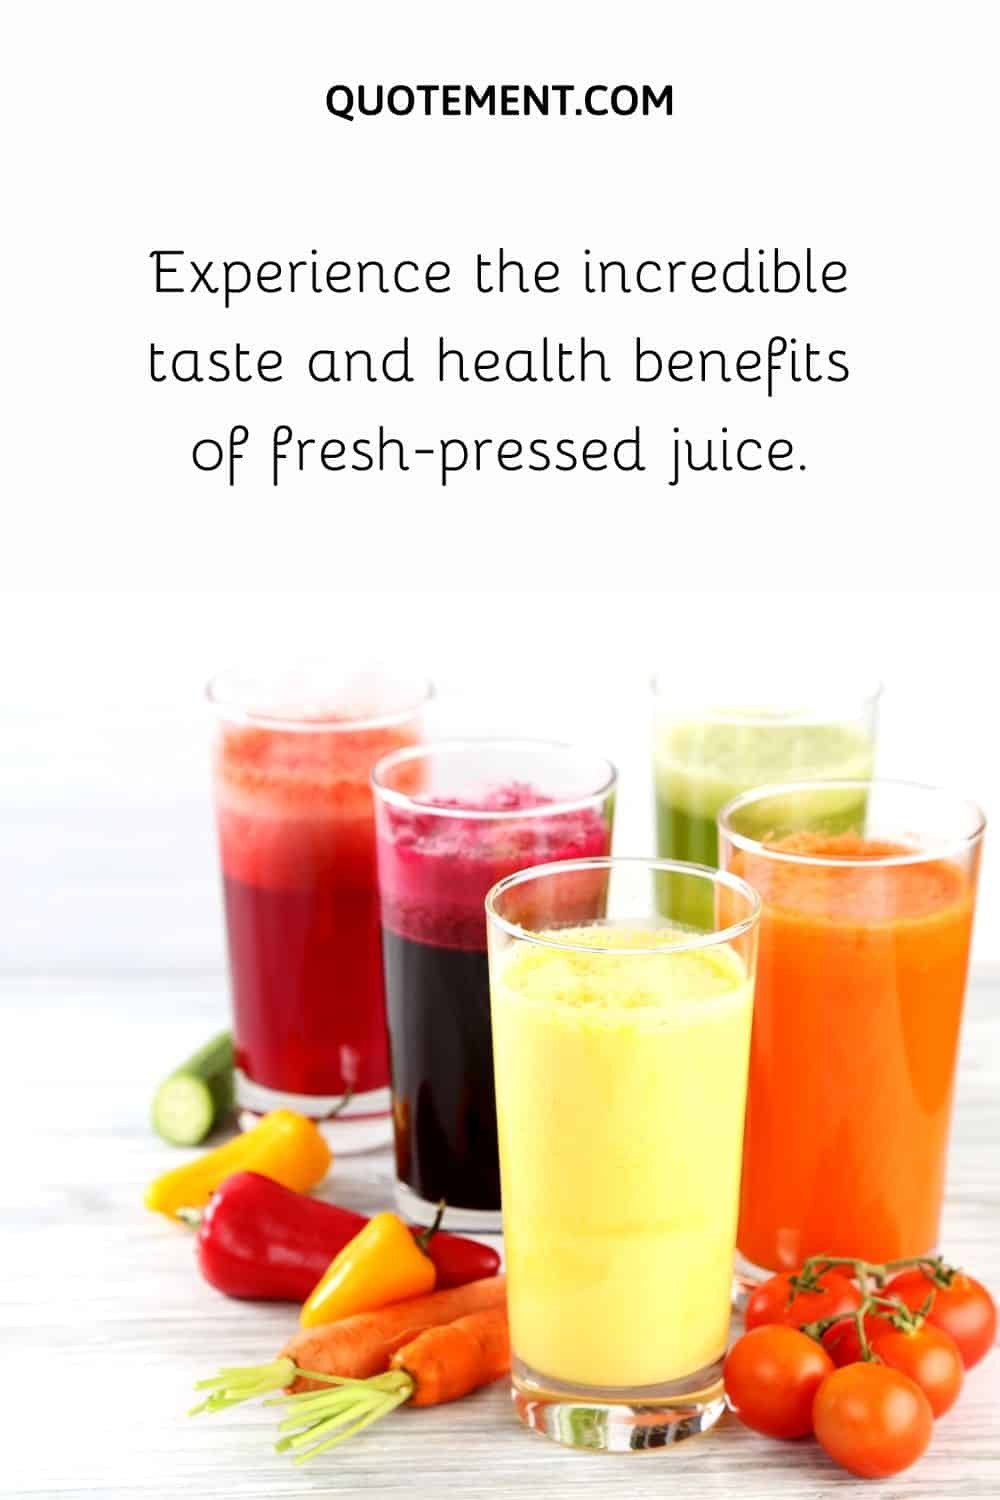 Experience the incredible taste and health benefits of fresh-pressed juice